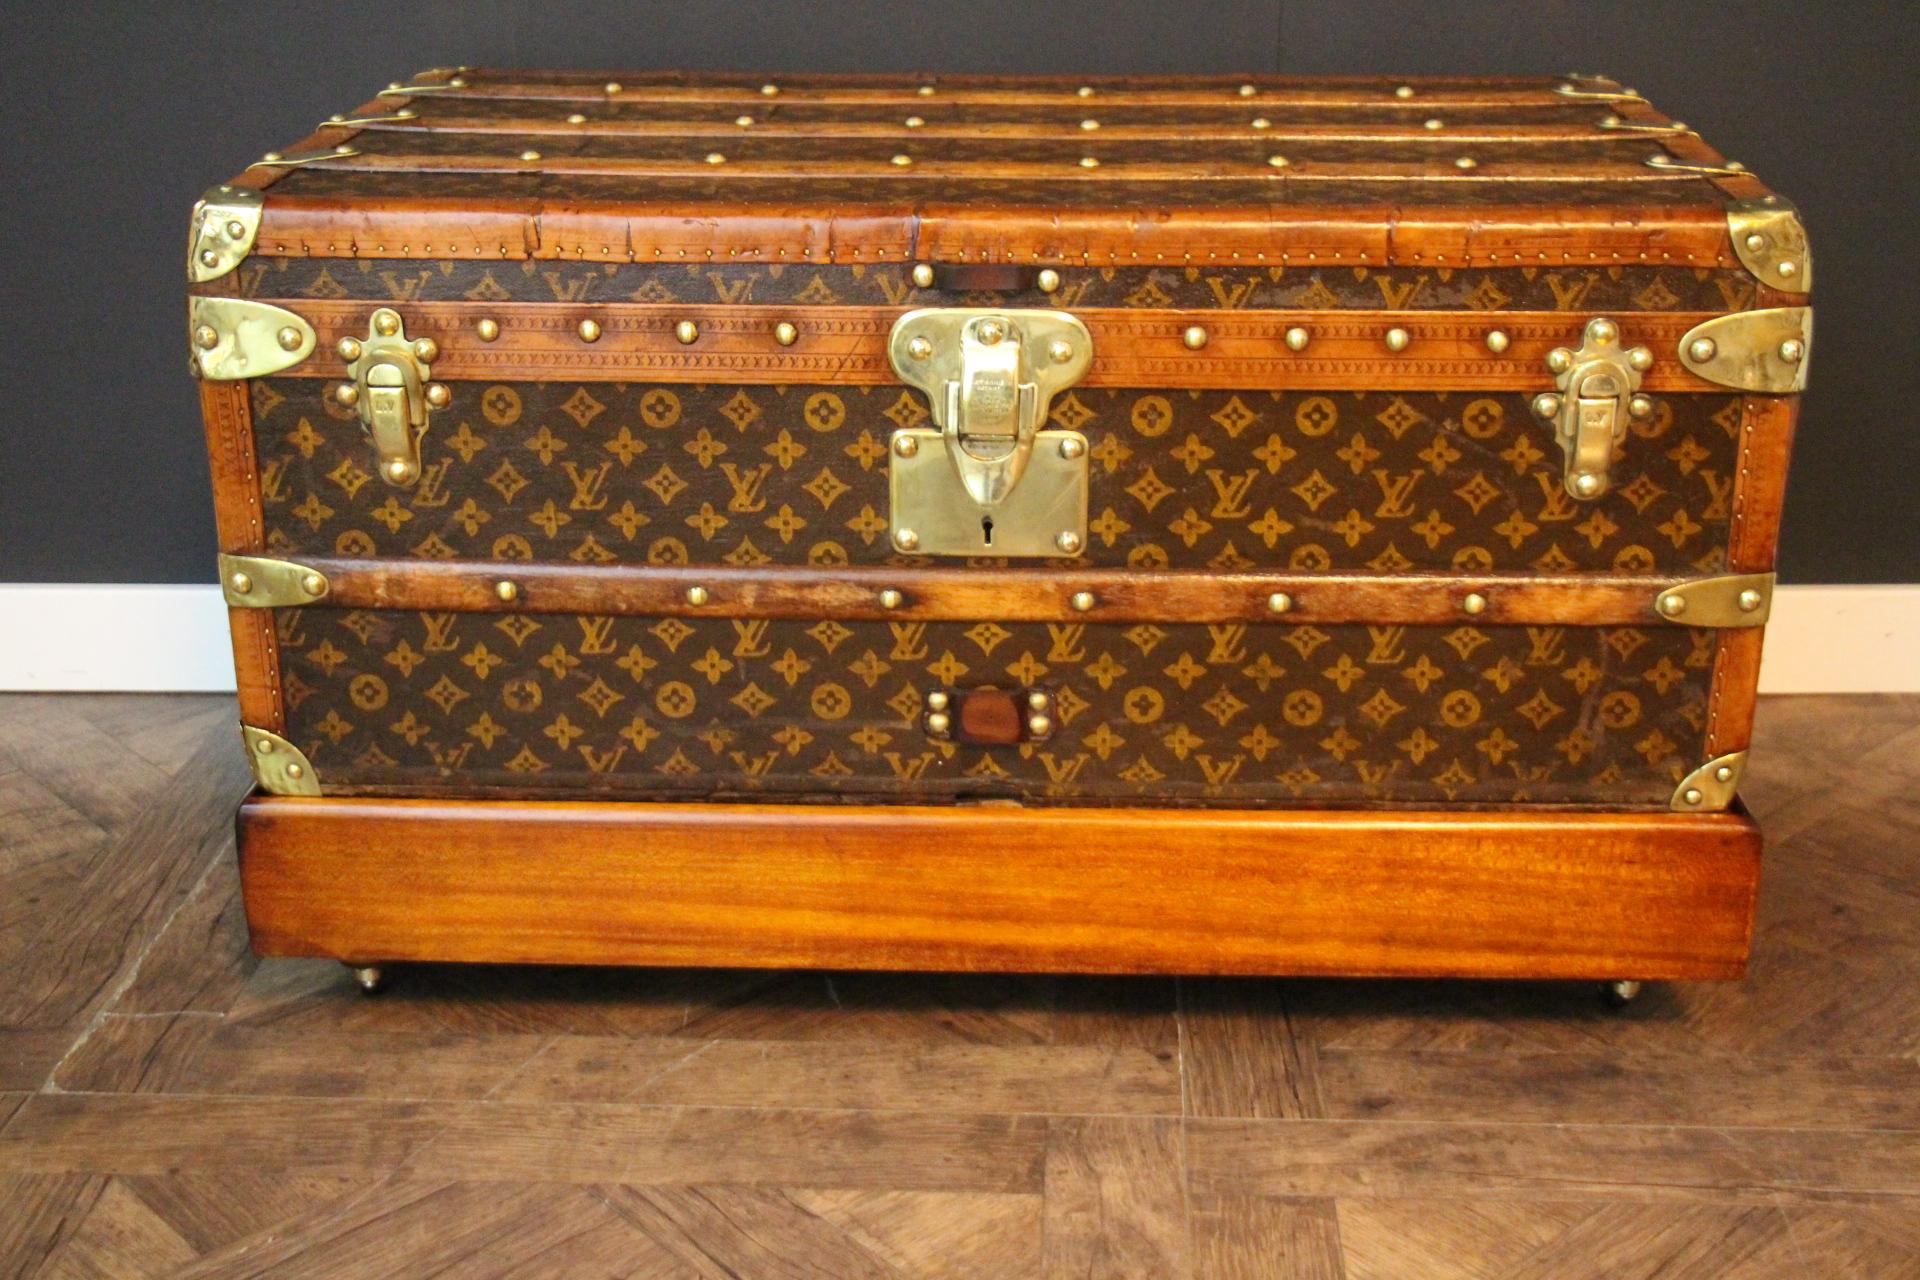 Very nice Louis Vuitton hand stenciled monogram canvas featuring light honey color login trim and LV stamped solid brass locks and clasps, Louis Vuitton stamped studs as well as large leather side handles. Its patina is warm and elegant.
Interior is